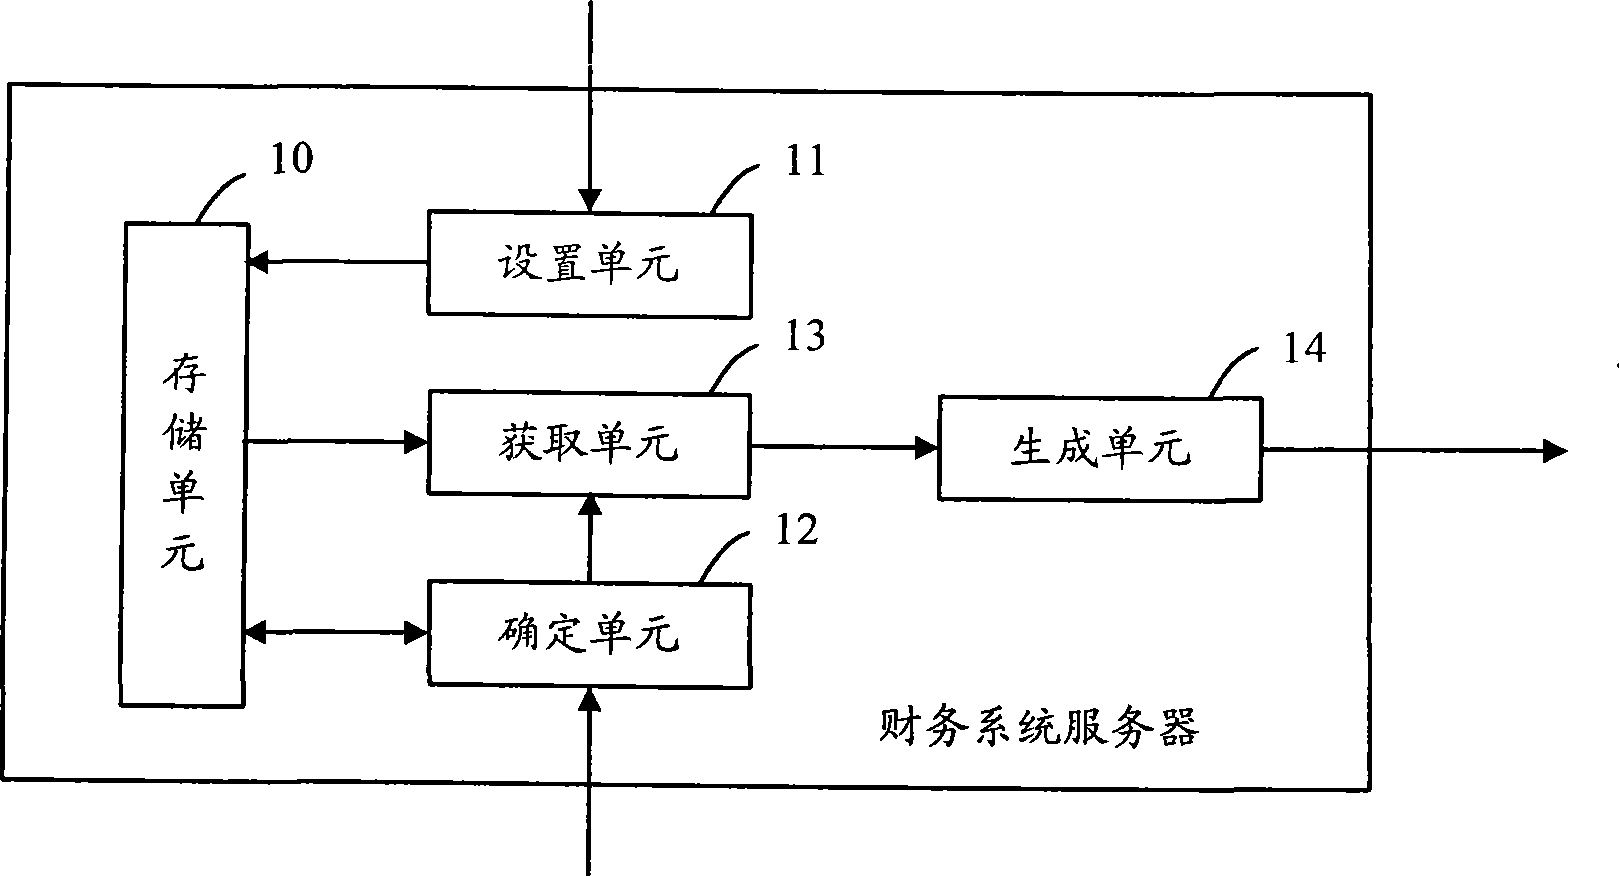 Method and apparatus for financial report generation